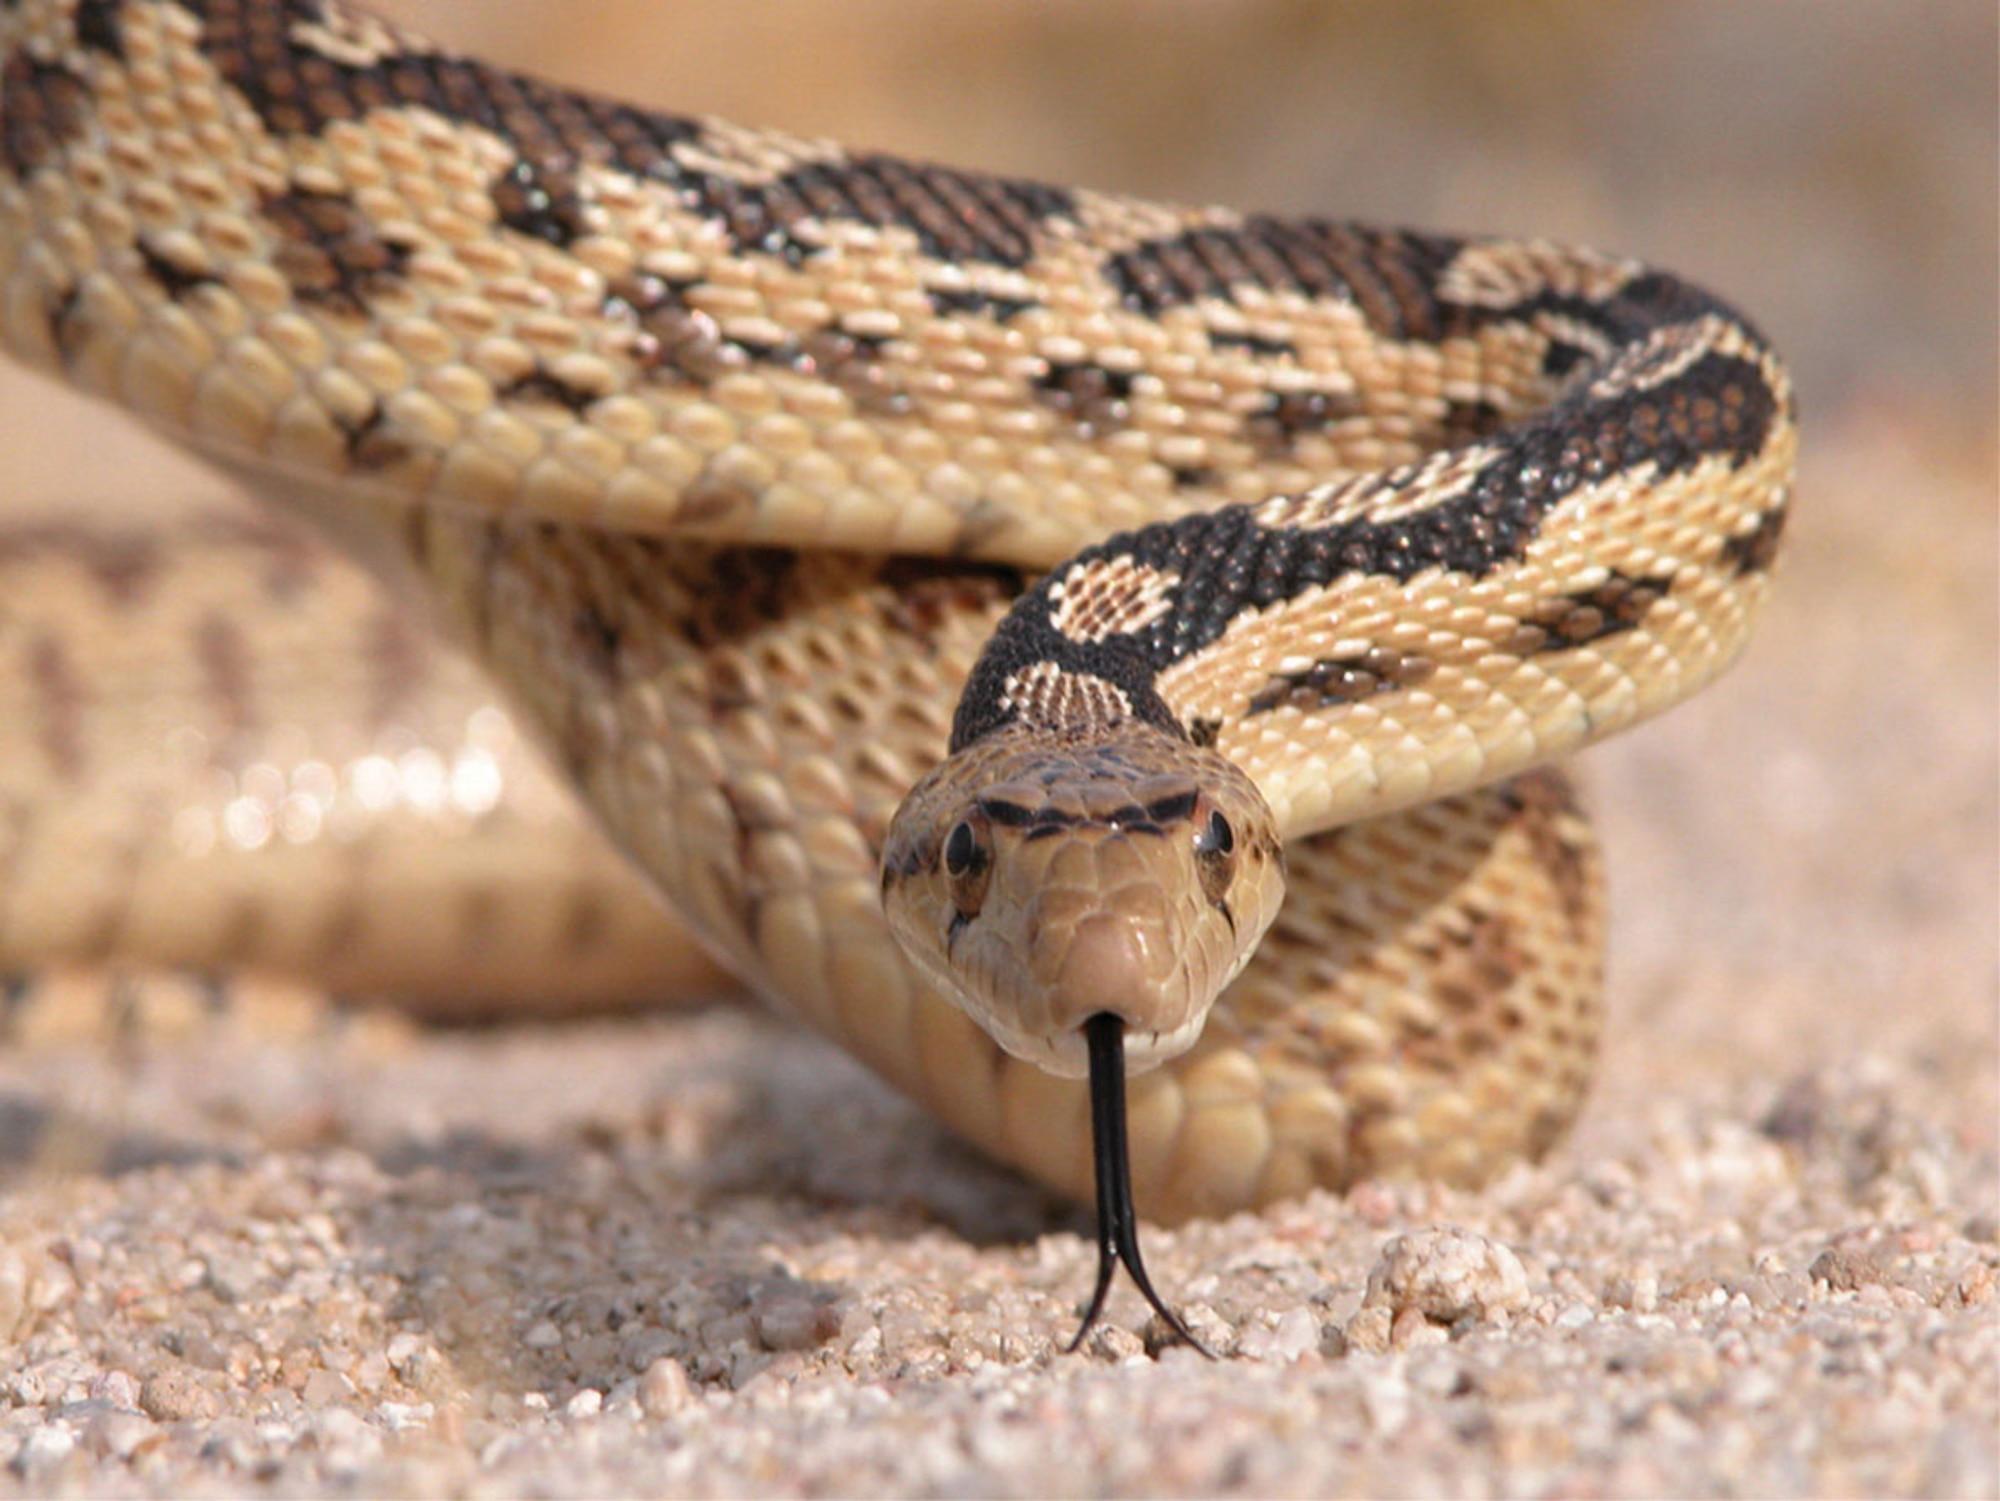 The gopher snake is one of the many reptiles common to the Mojave Desert area. Other snakes seen here are the Mojave green rattlesnake, the sidewinder rattlesnake and the California king snake. (Photo by Mark Bratton)